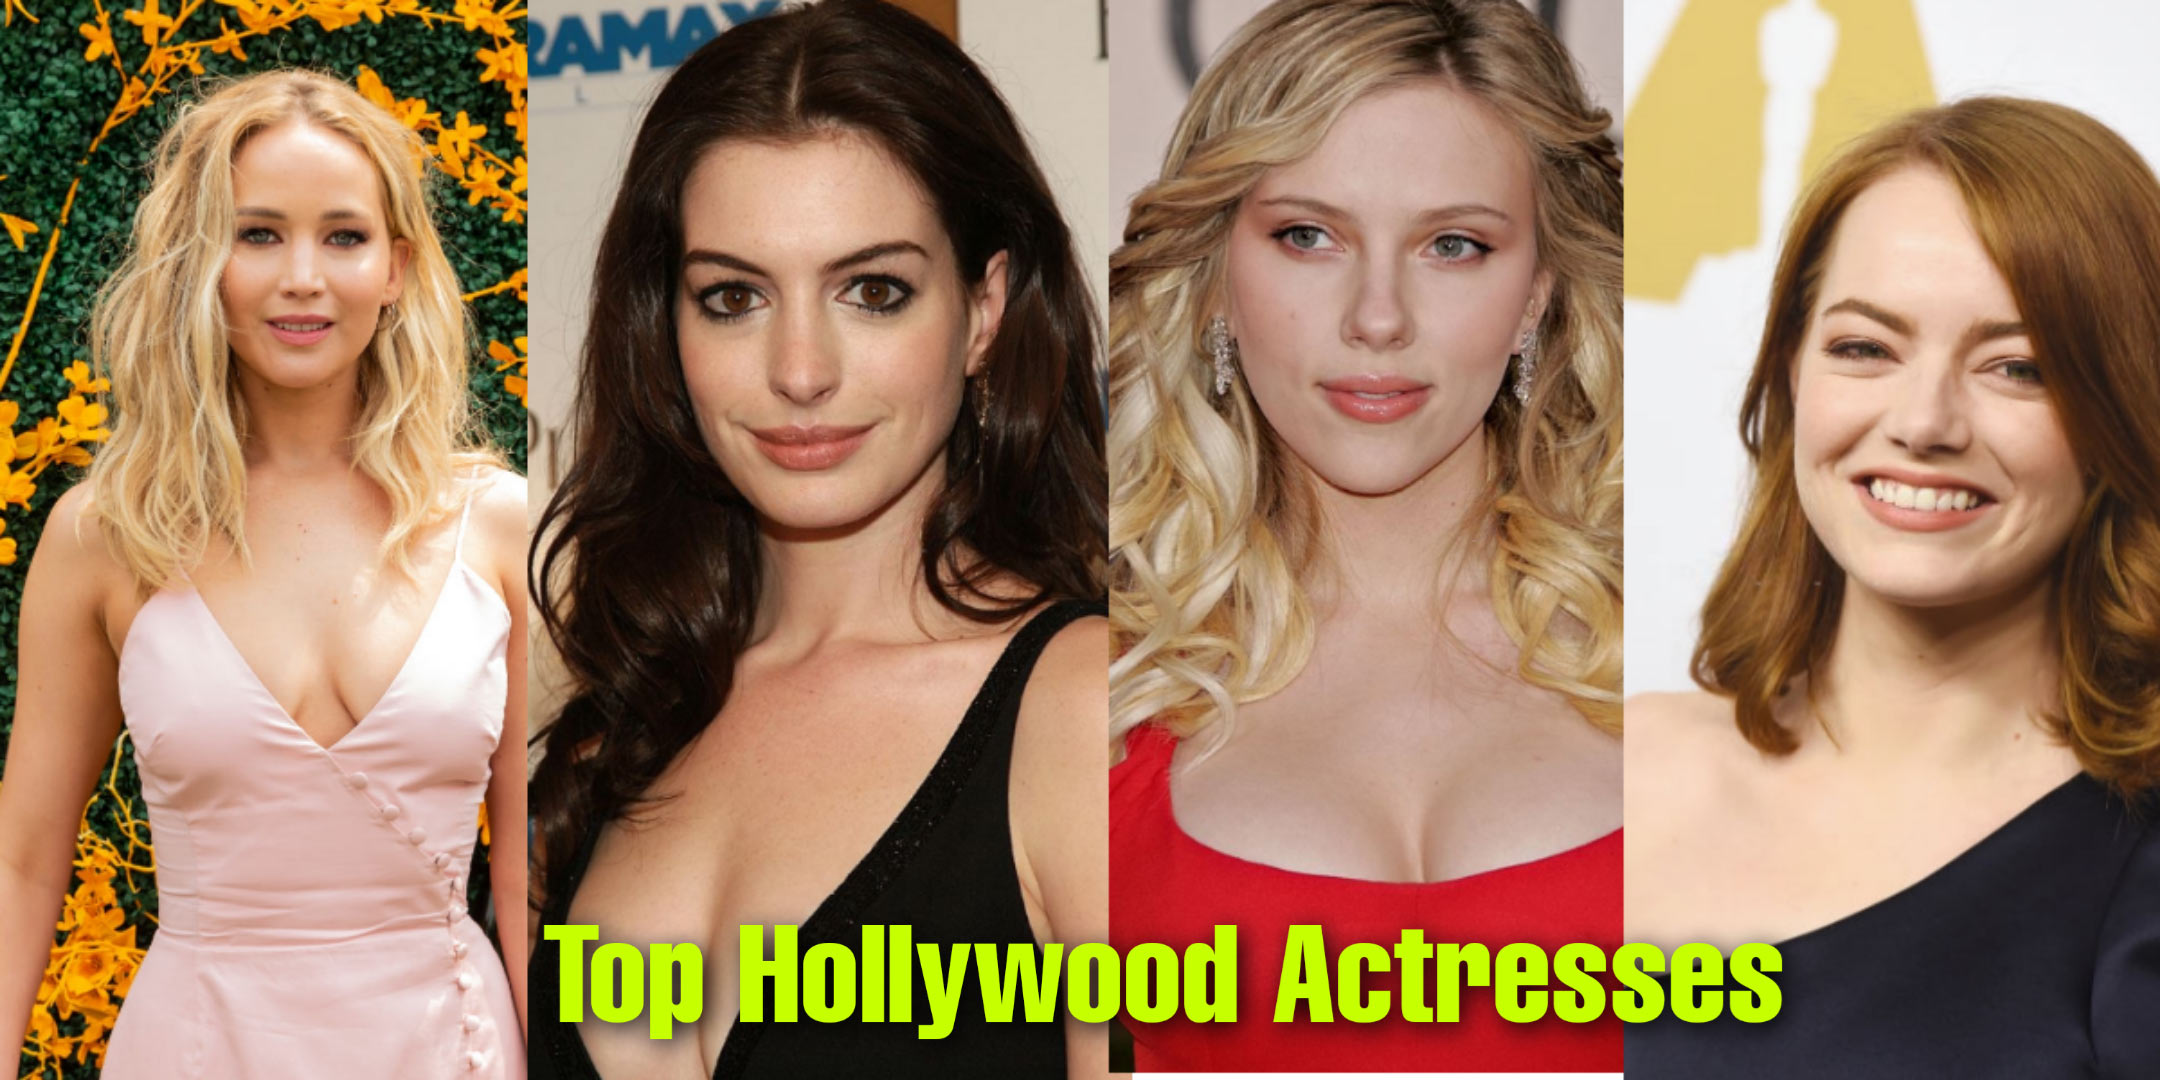 Top 10 Hollywood Actresses Beauty Brains And Highest Paid 2020 